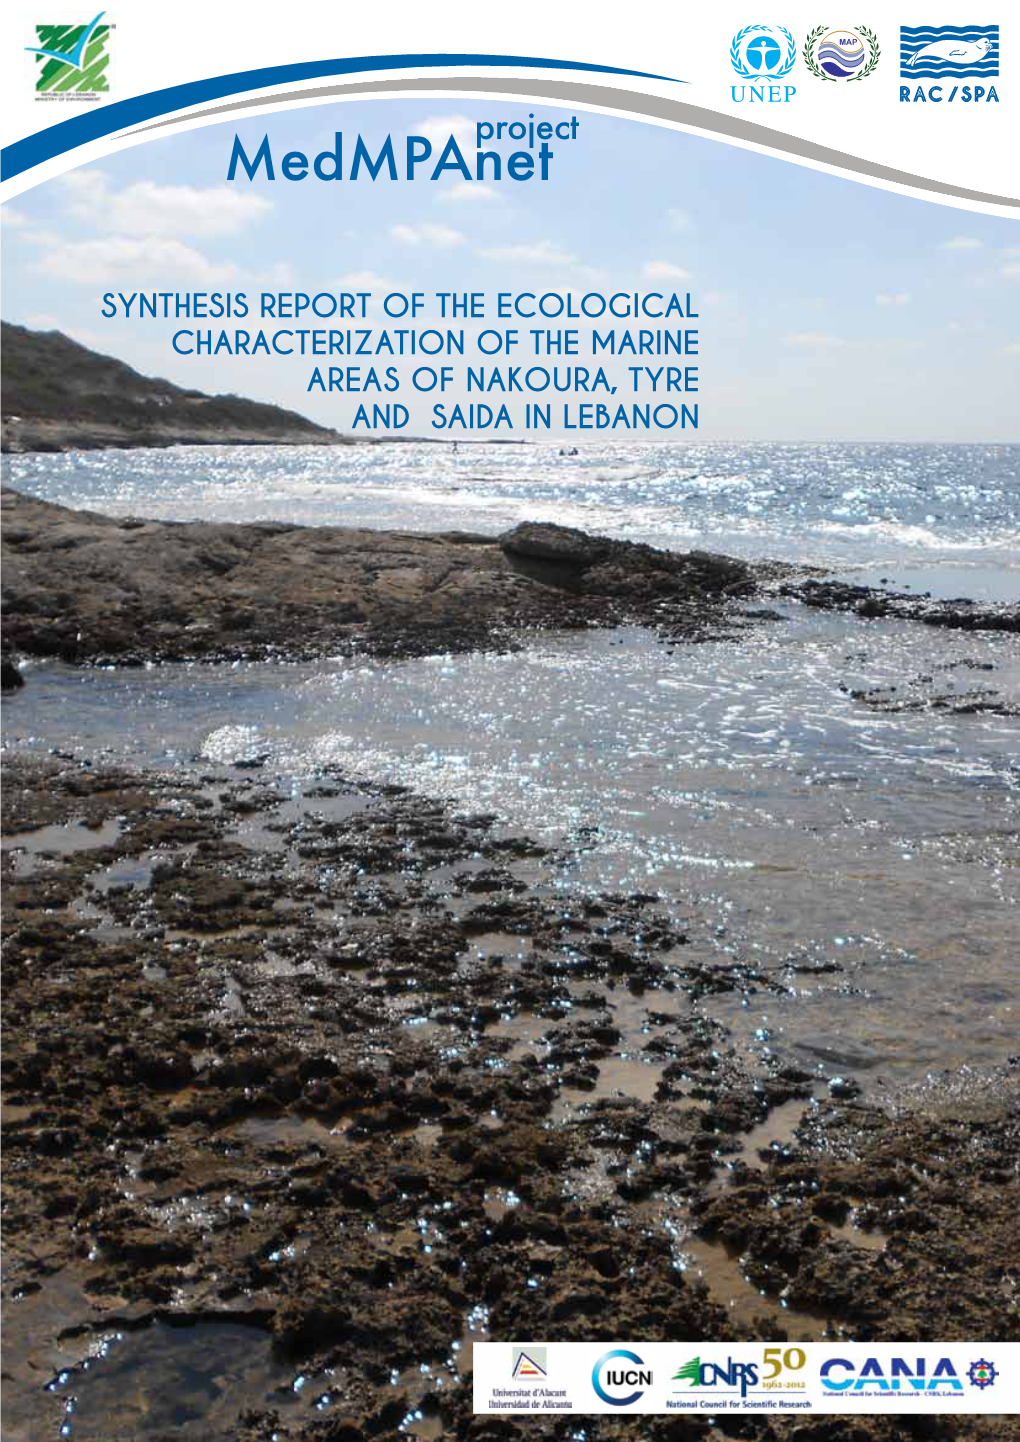 Synthesis Report of the Ecological Characterization of the Marine Areas of Nakoura, Tyre and Saida in Lebanon